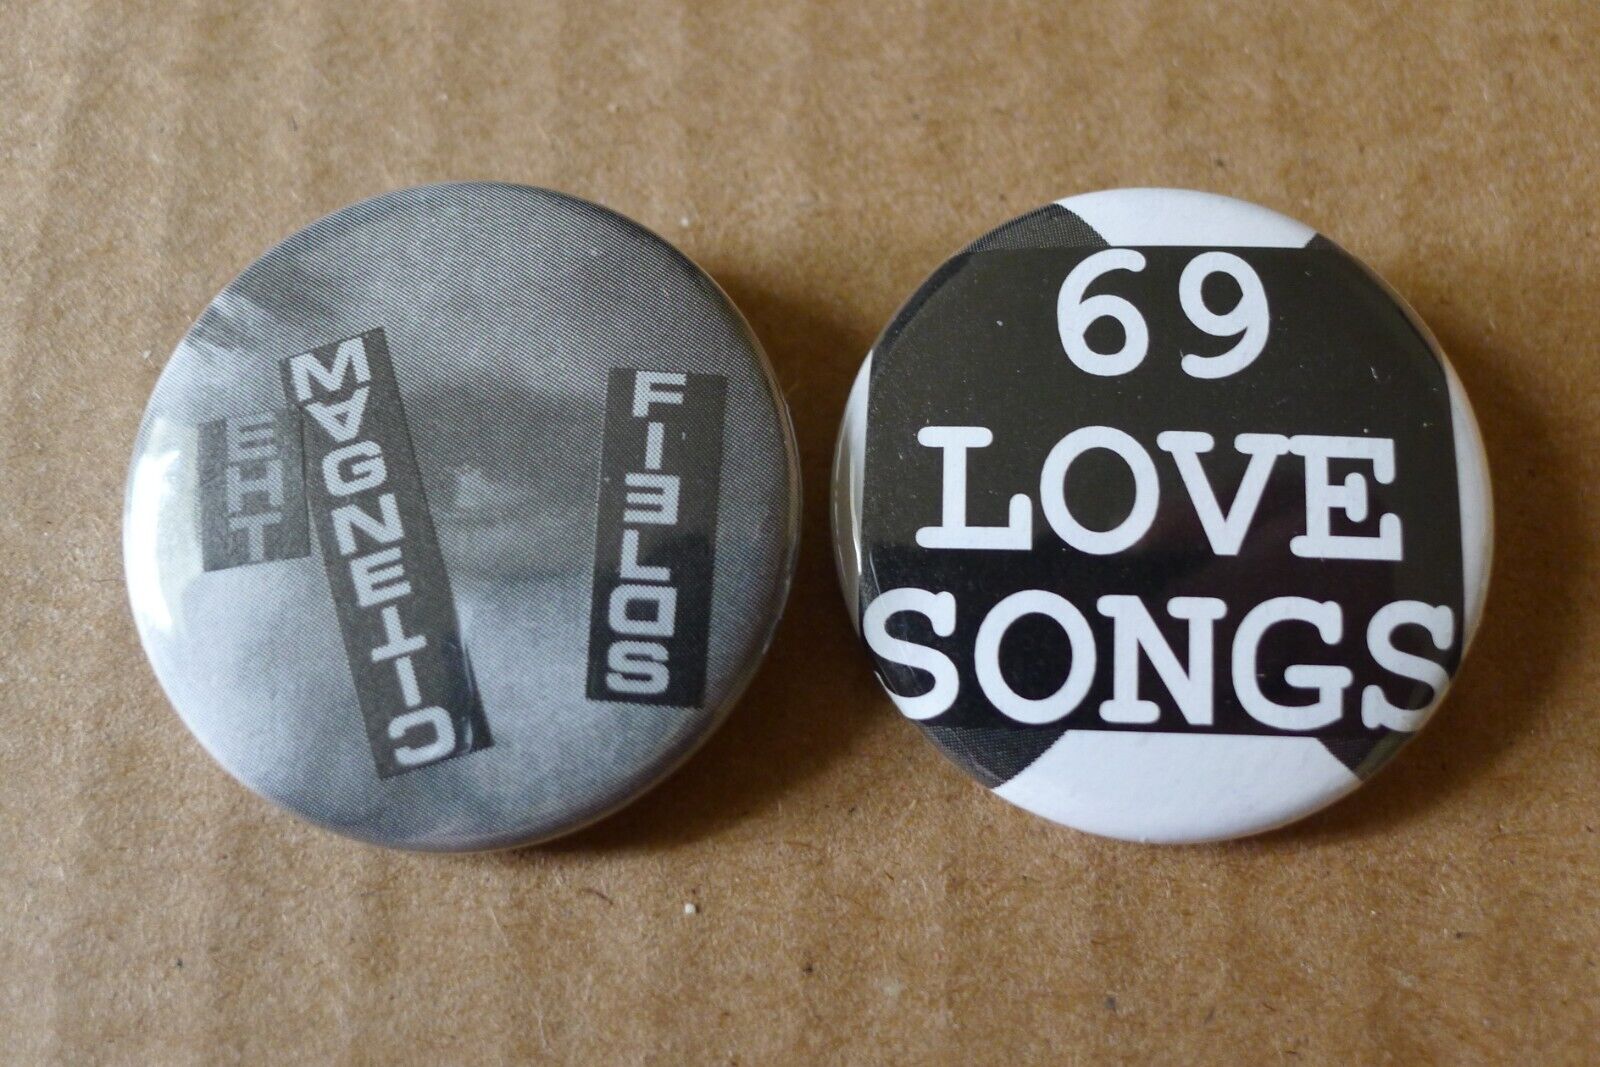 MAGNETIC FIELDS band (2) Pinback Button LOT indie rock 69 LOVE SONGS synth pop